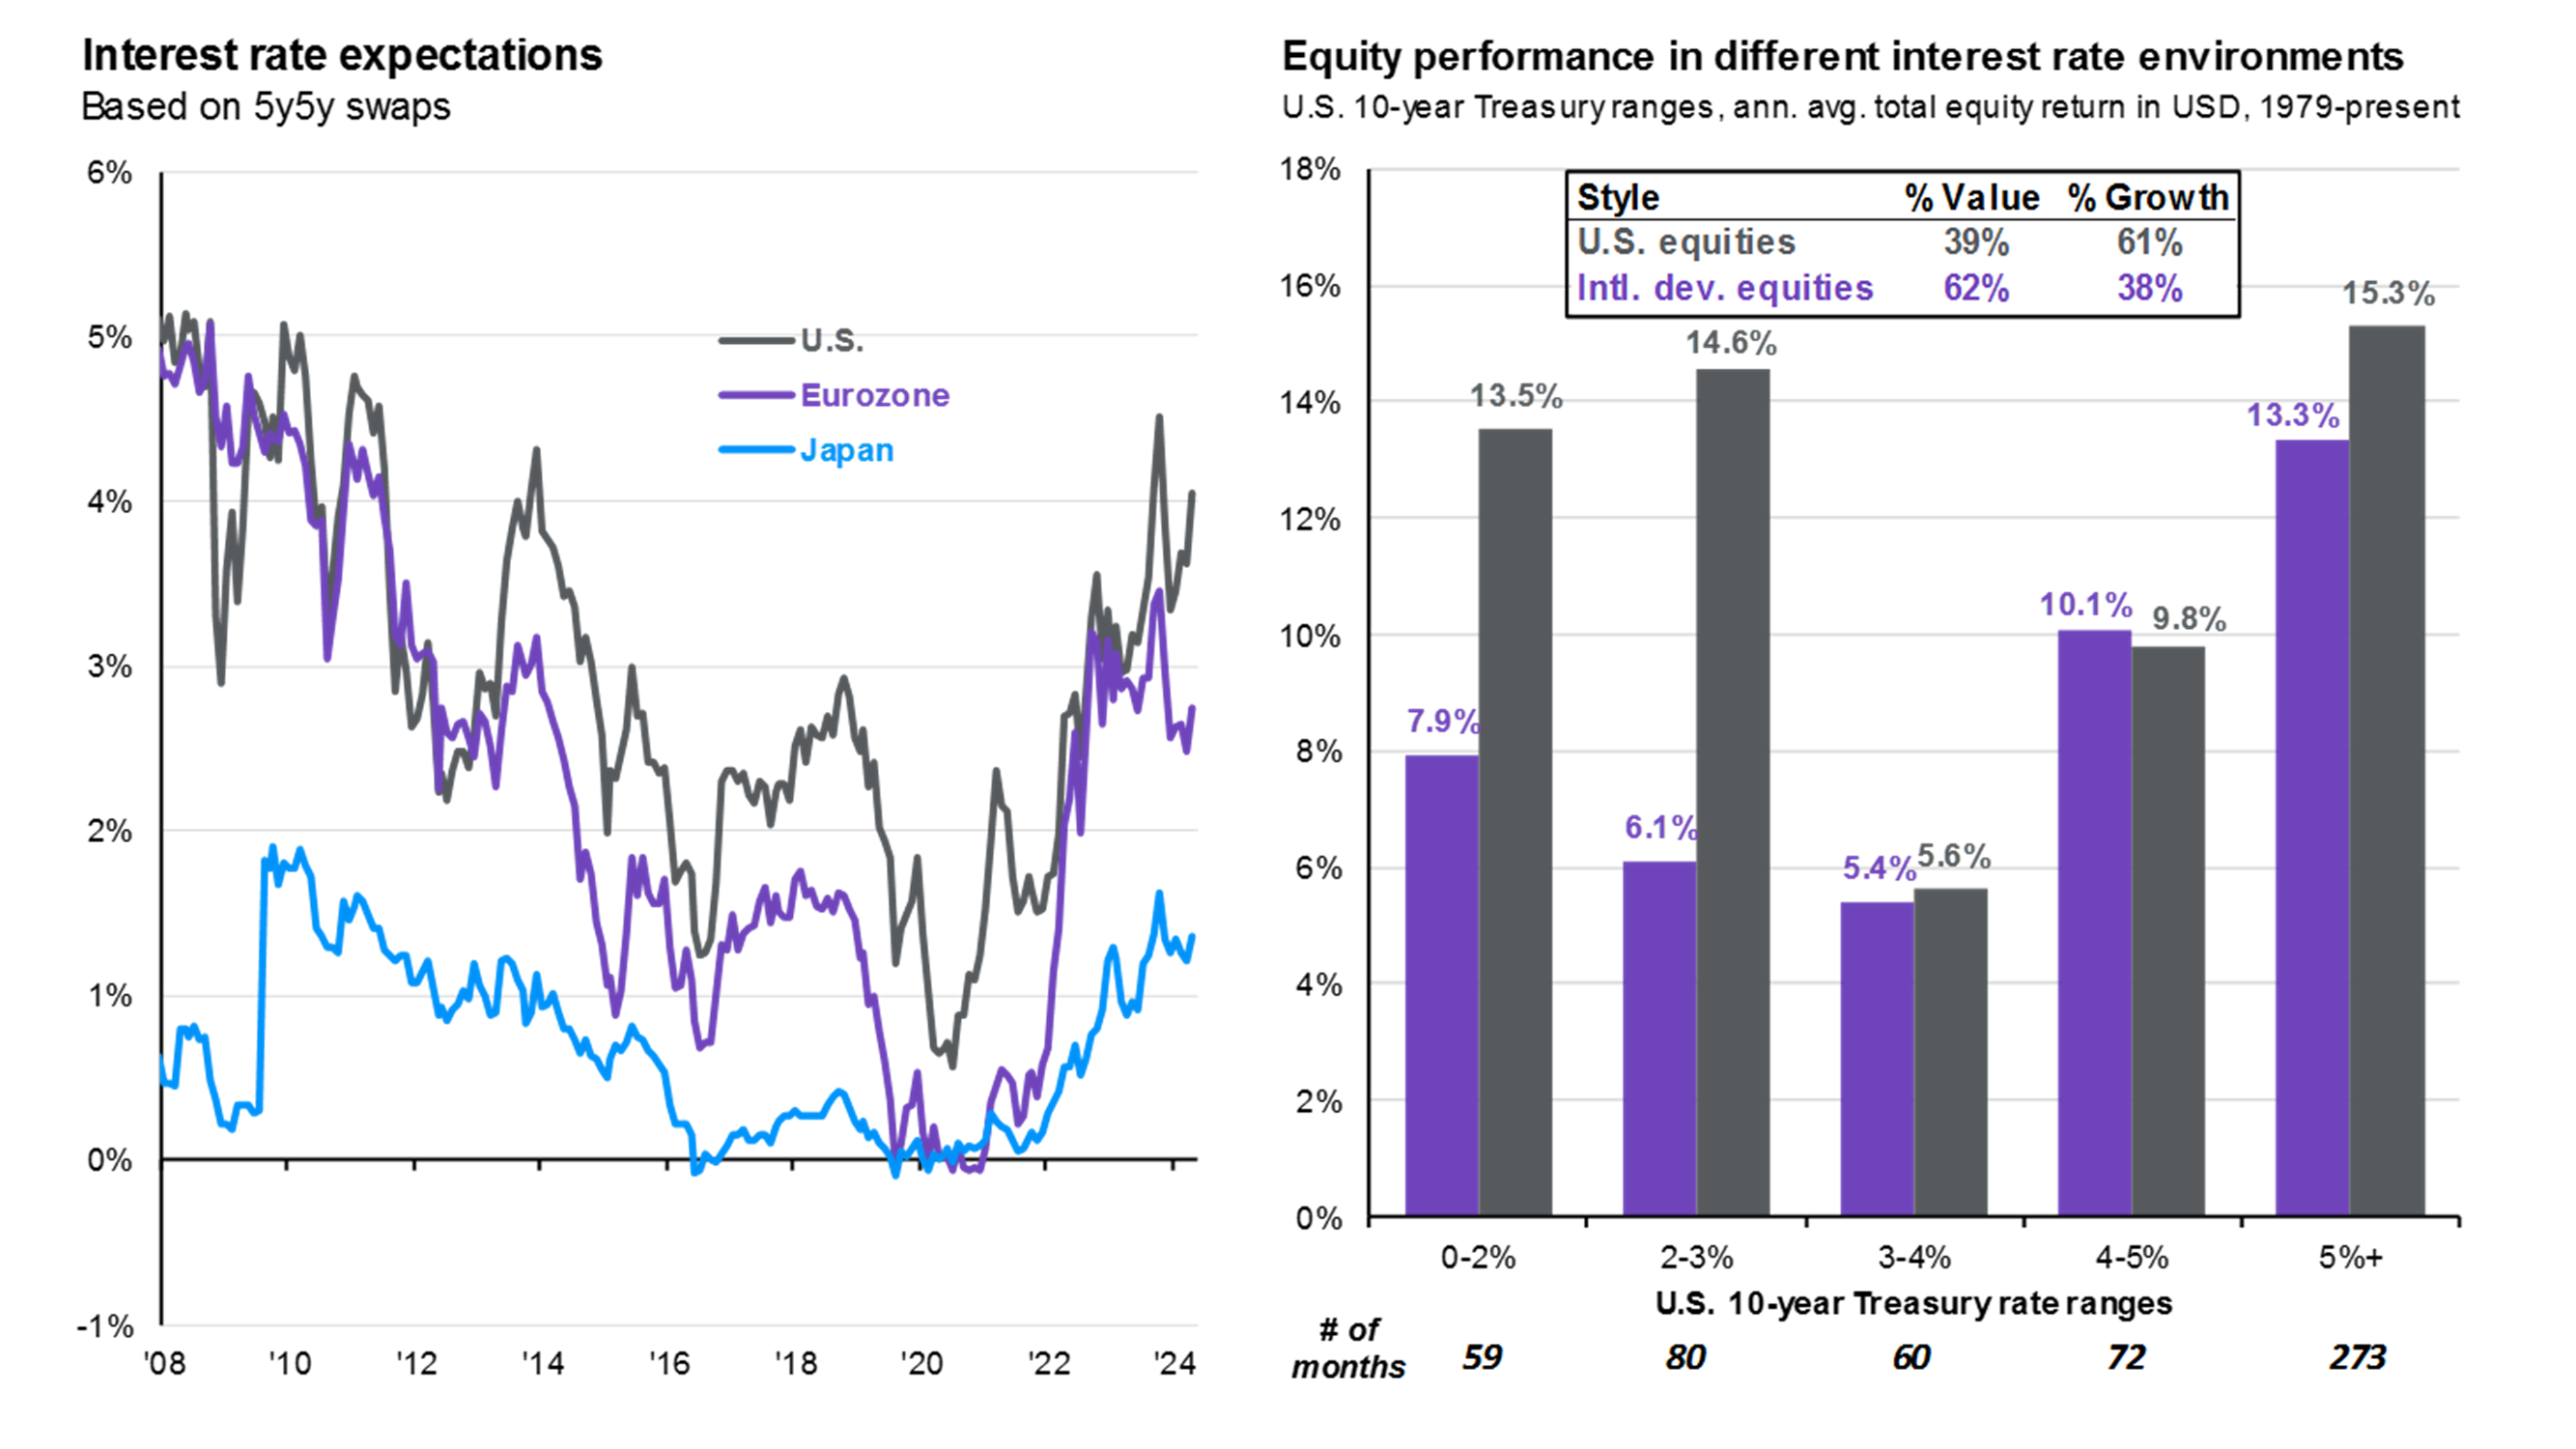 International equity earnings and valuations